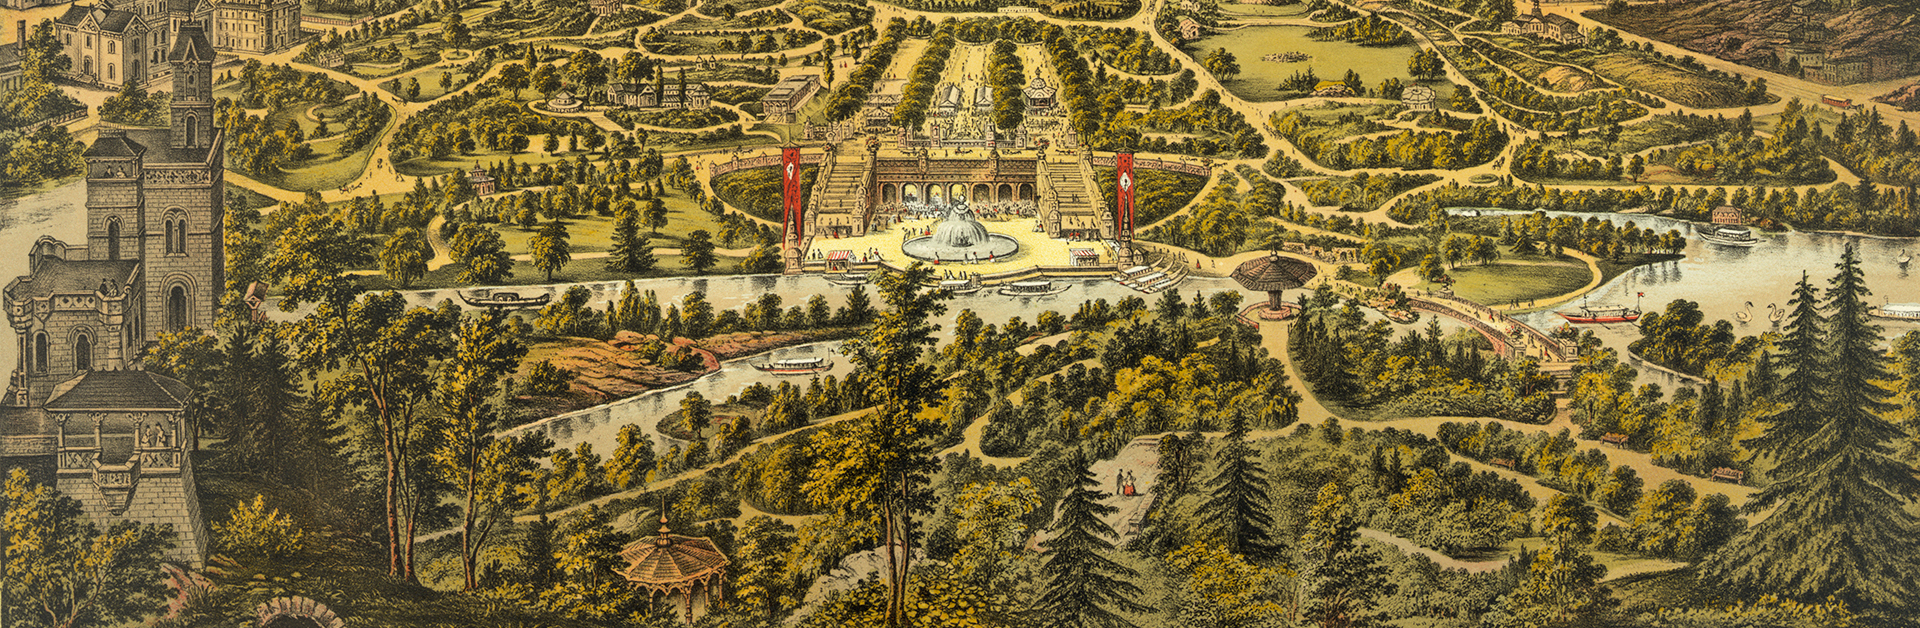 detail of New York's Central Park in a 19th century print